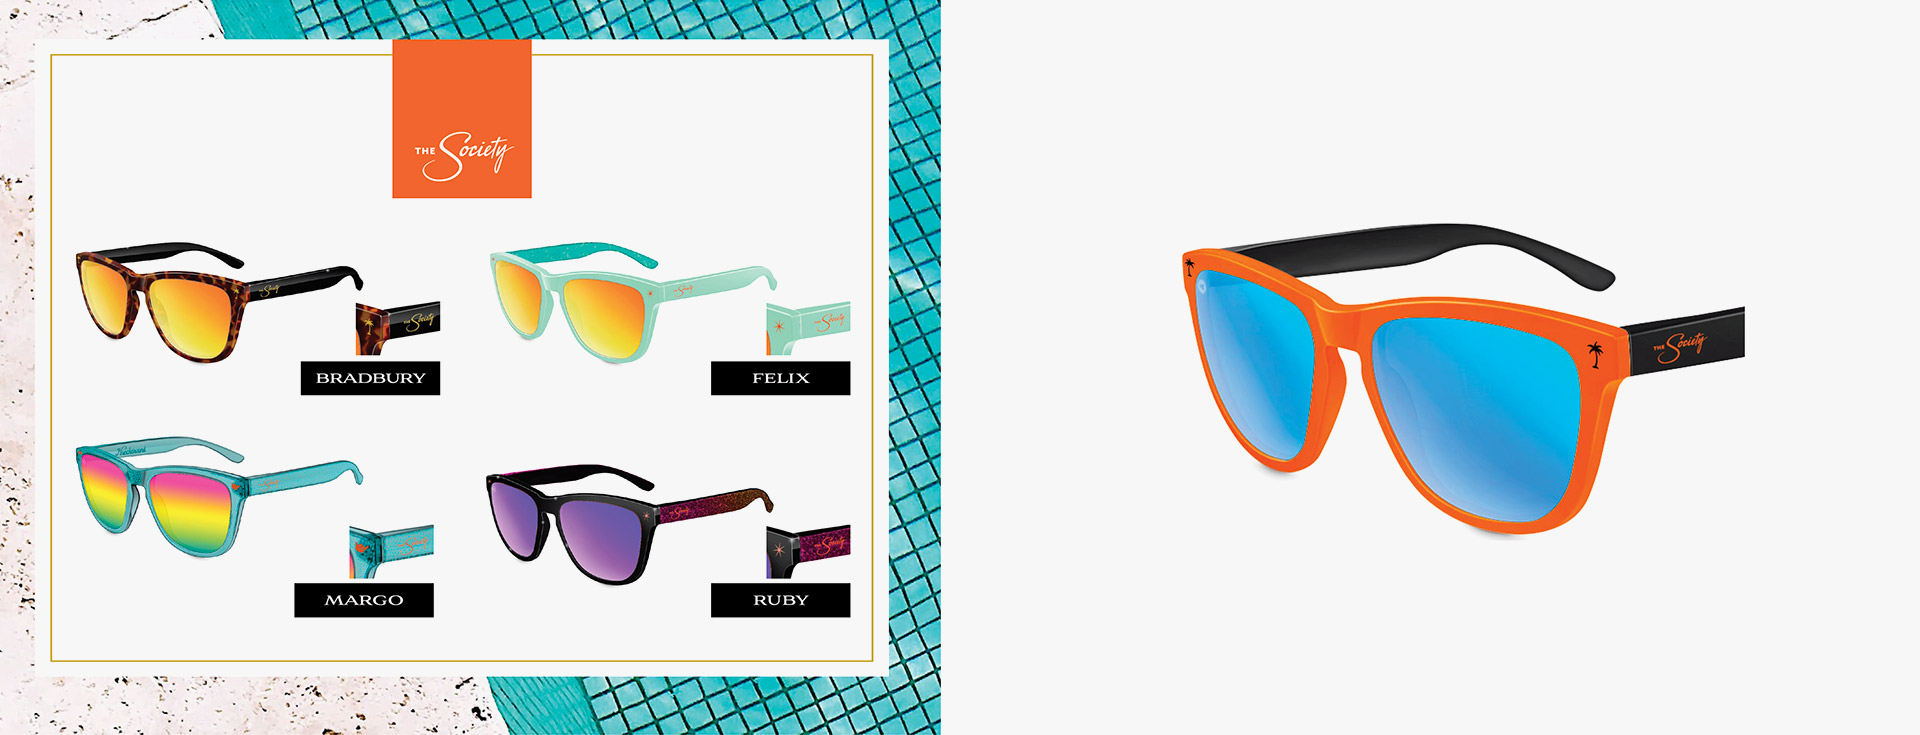 The Society apartments branding mockups of sunglasses created by Incubate Design for Holland Residential